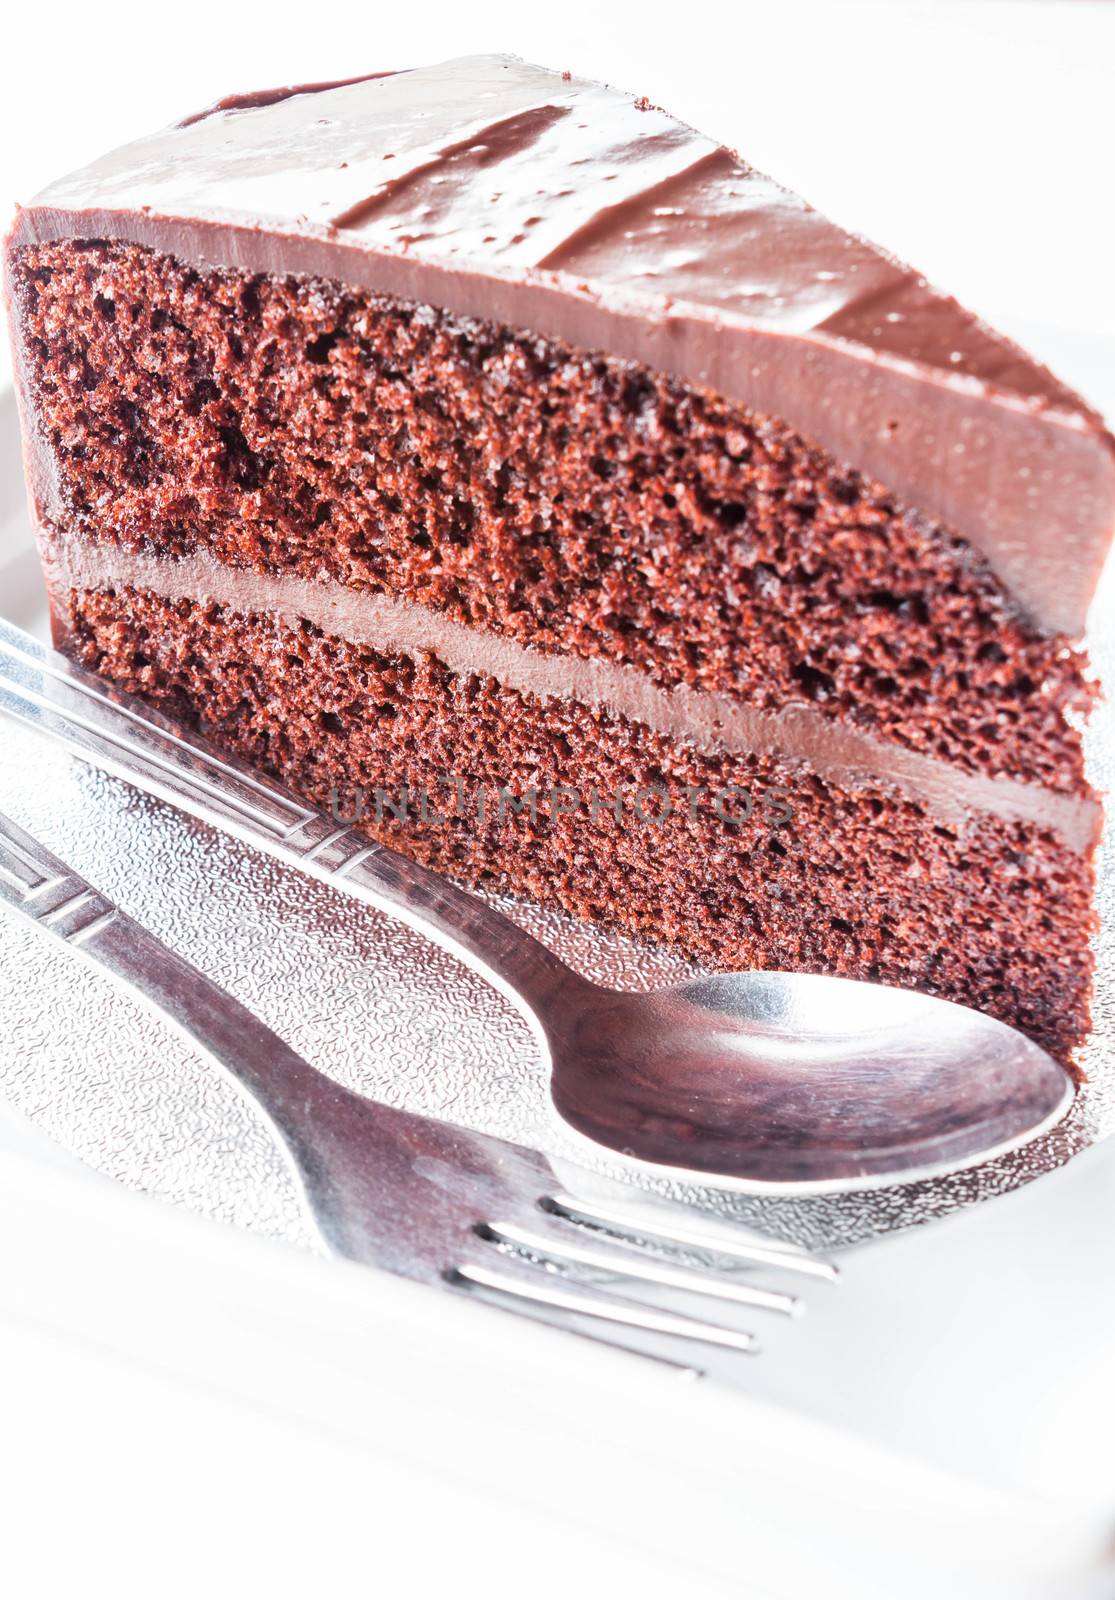 Piece of chocolate cake with spoon and fork